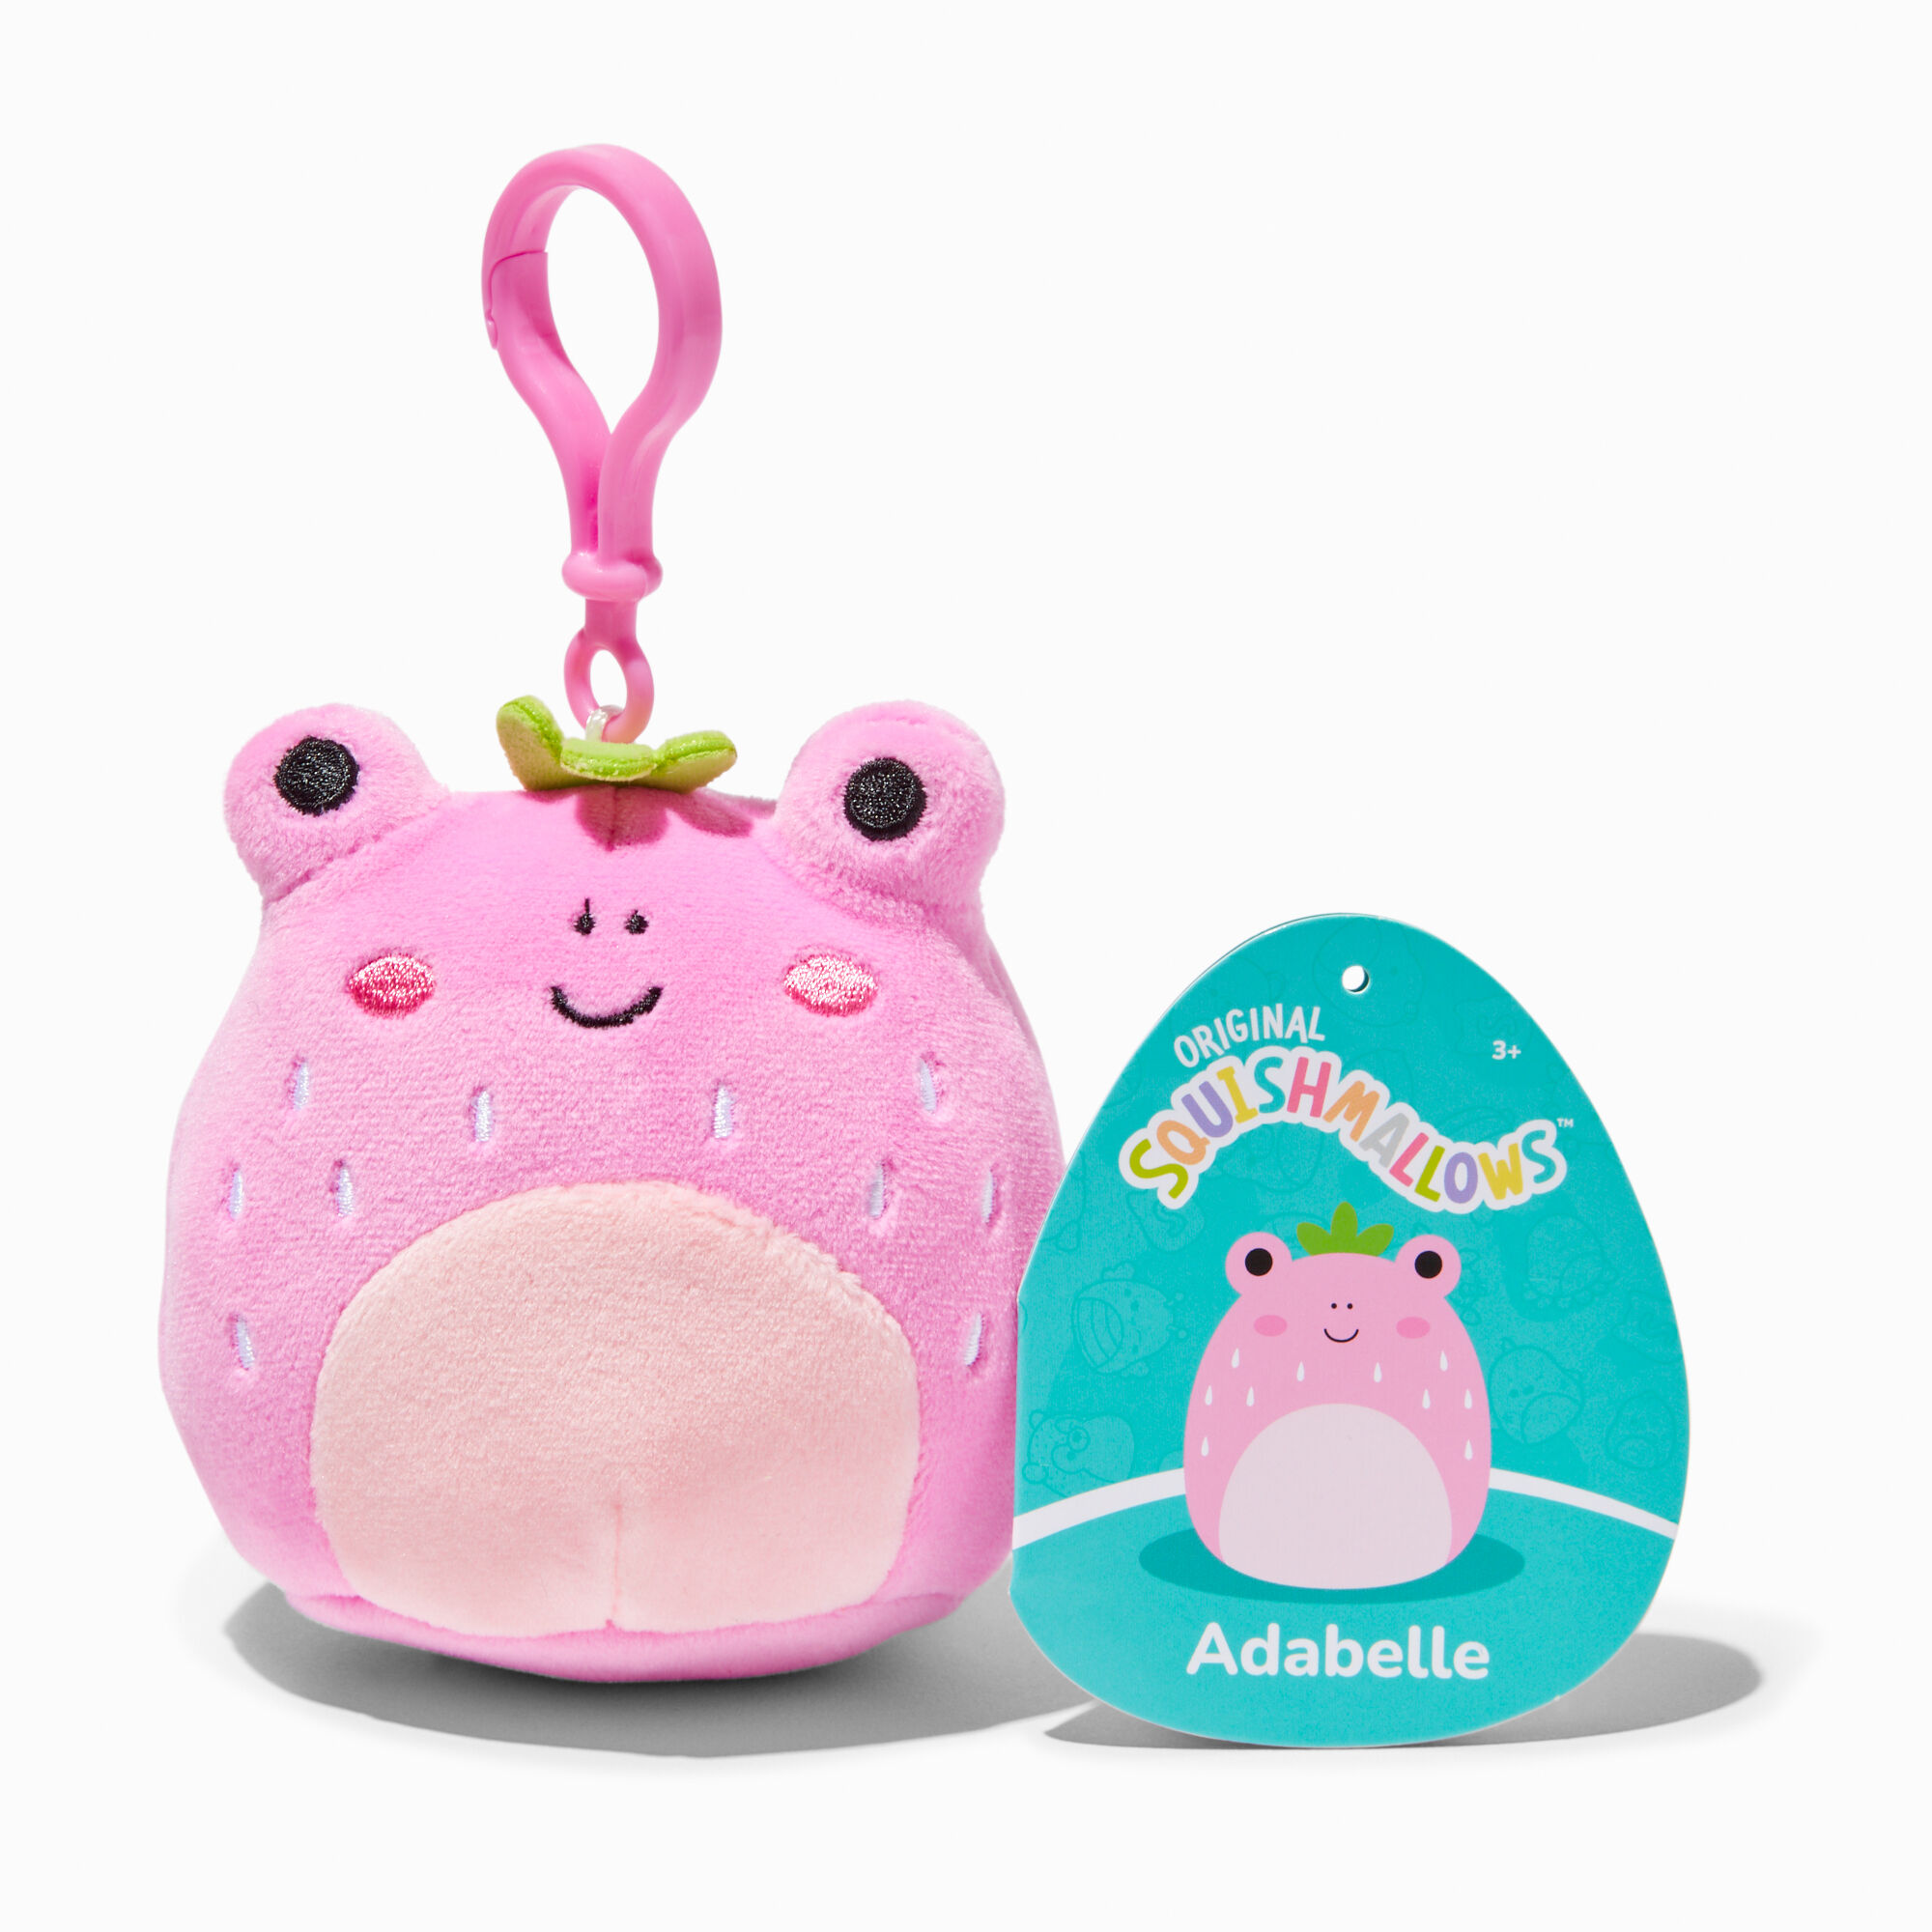 Squishmallows™ 3.5 Adabelle the Strawberry Frog Plush Toy